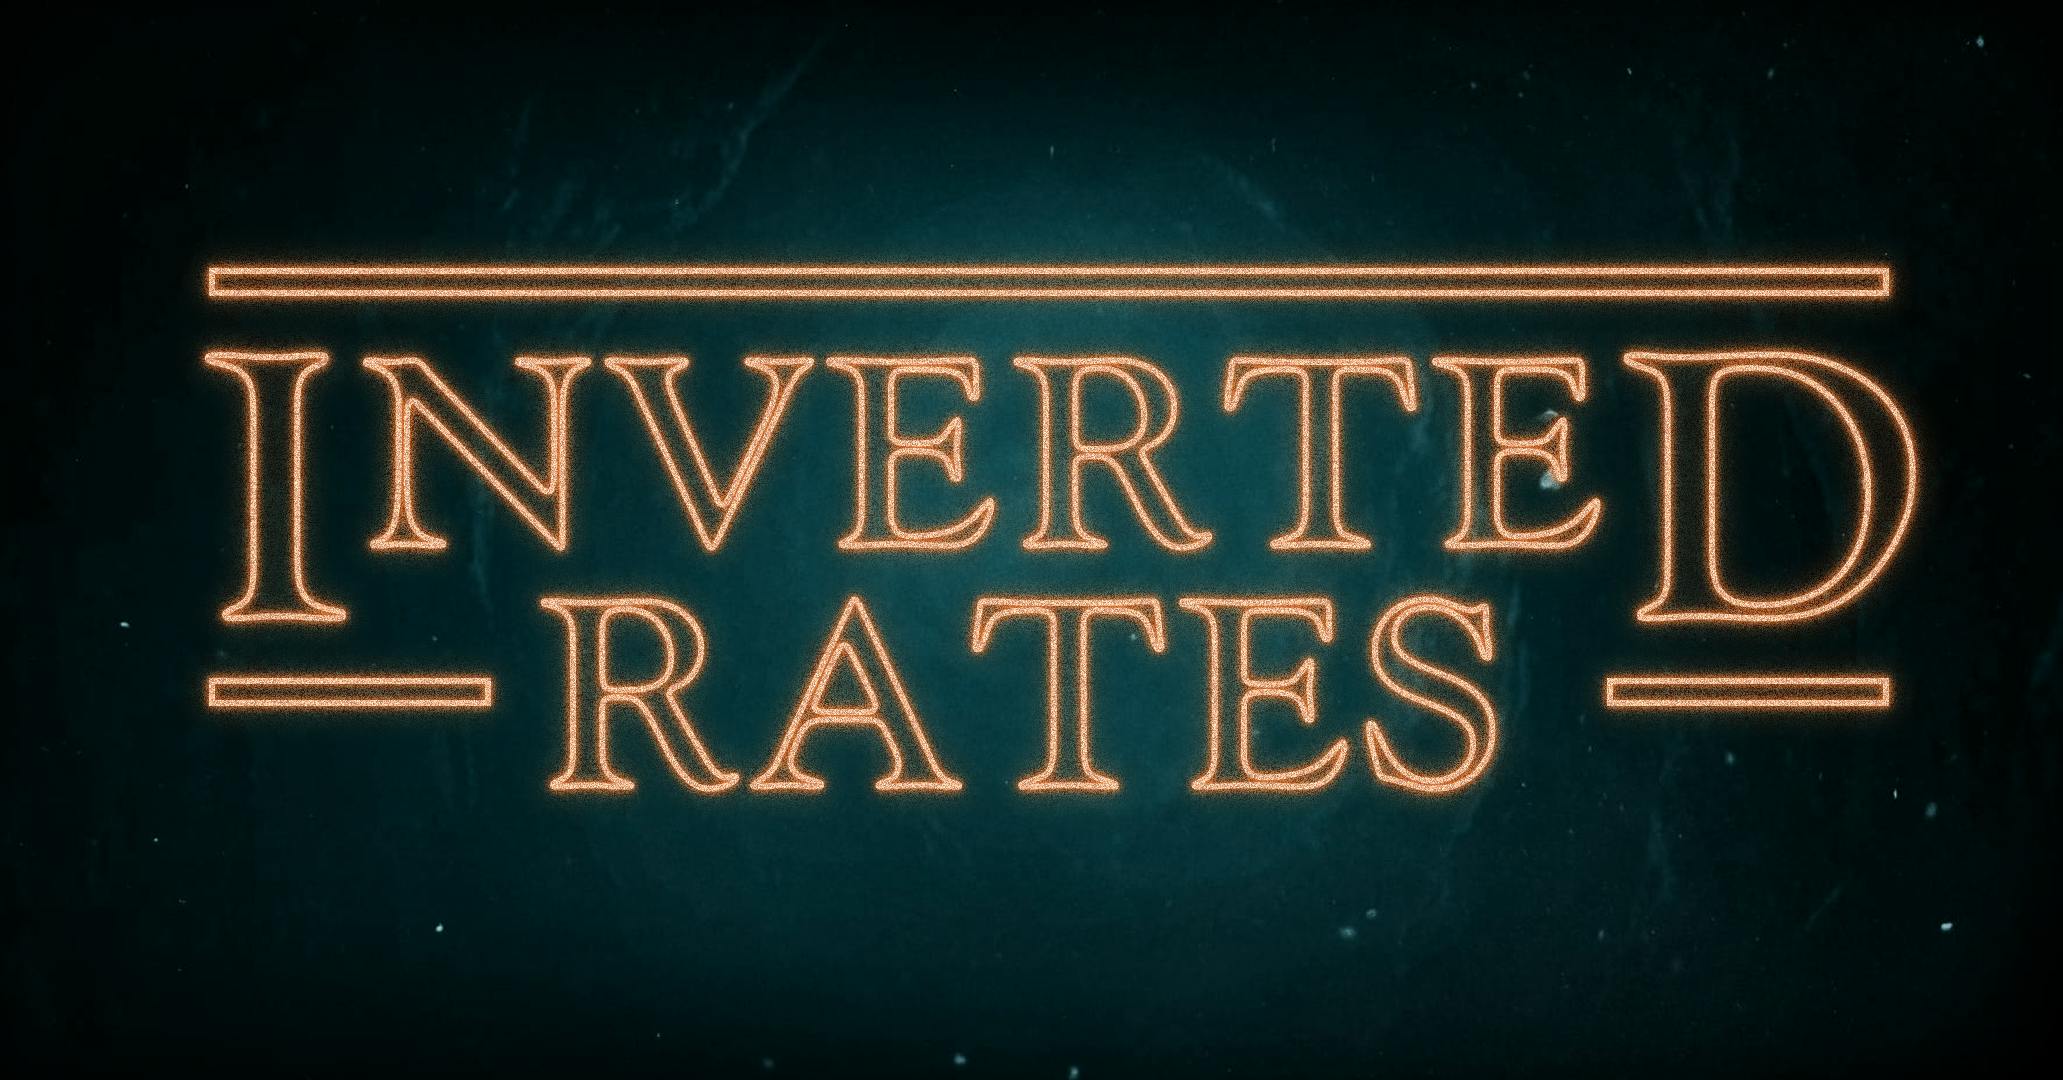 Fixed rates lower than variable rates? Whoa.